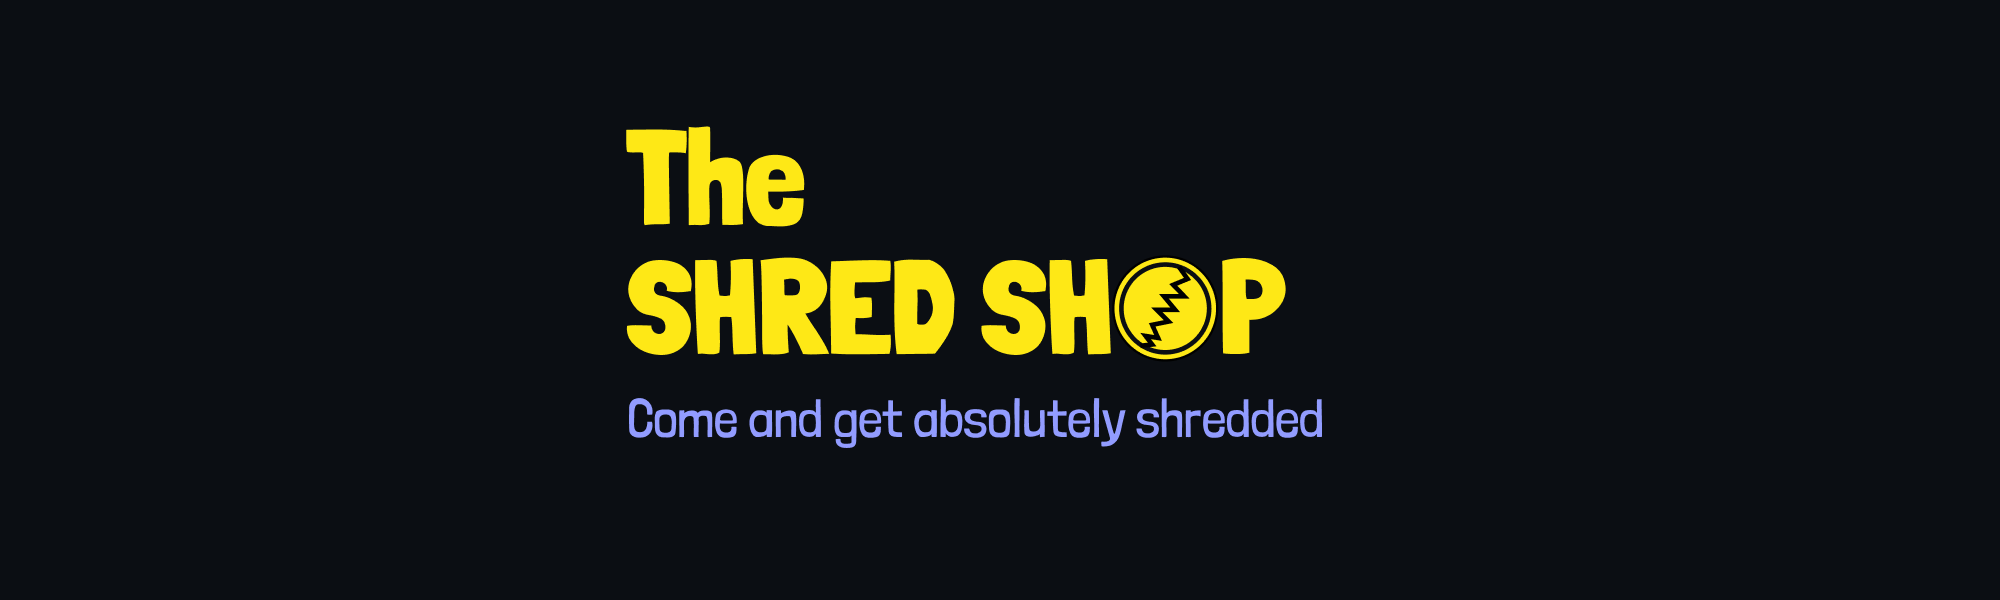 The Shred Shop